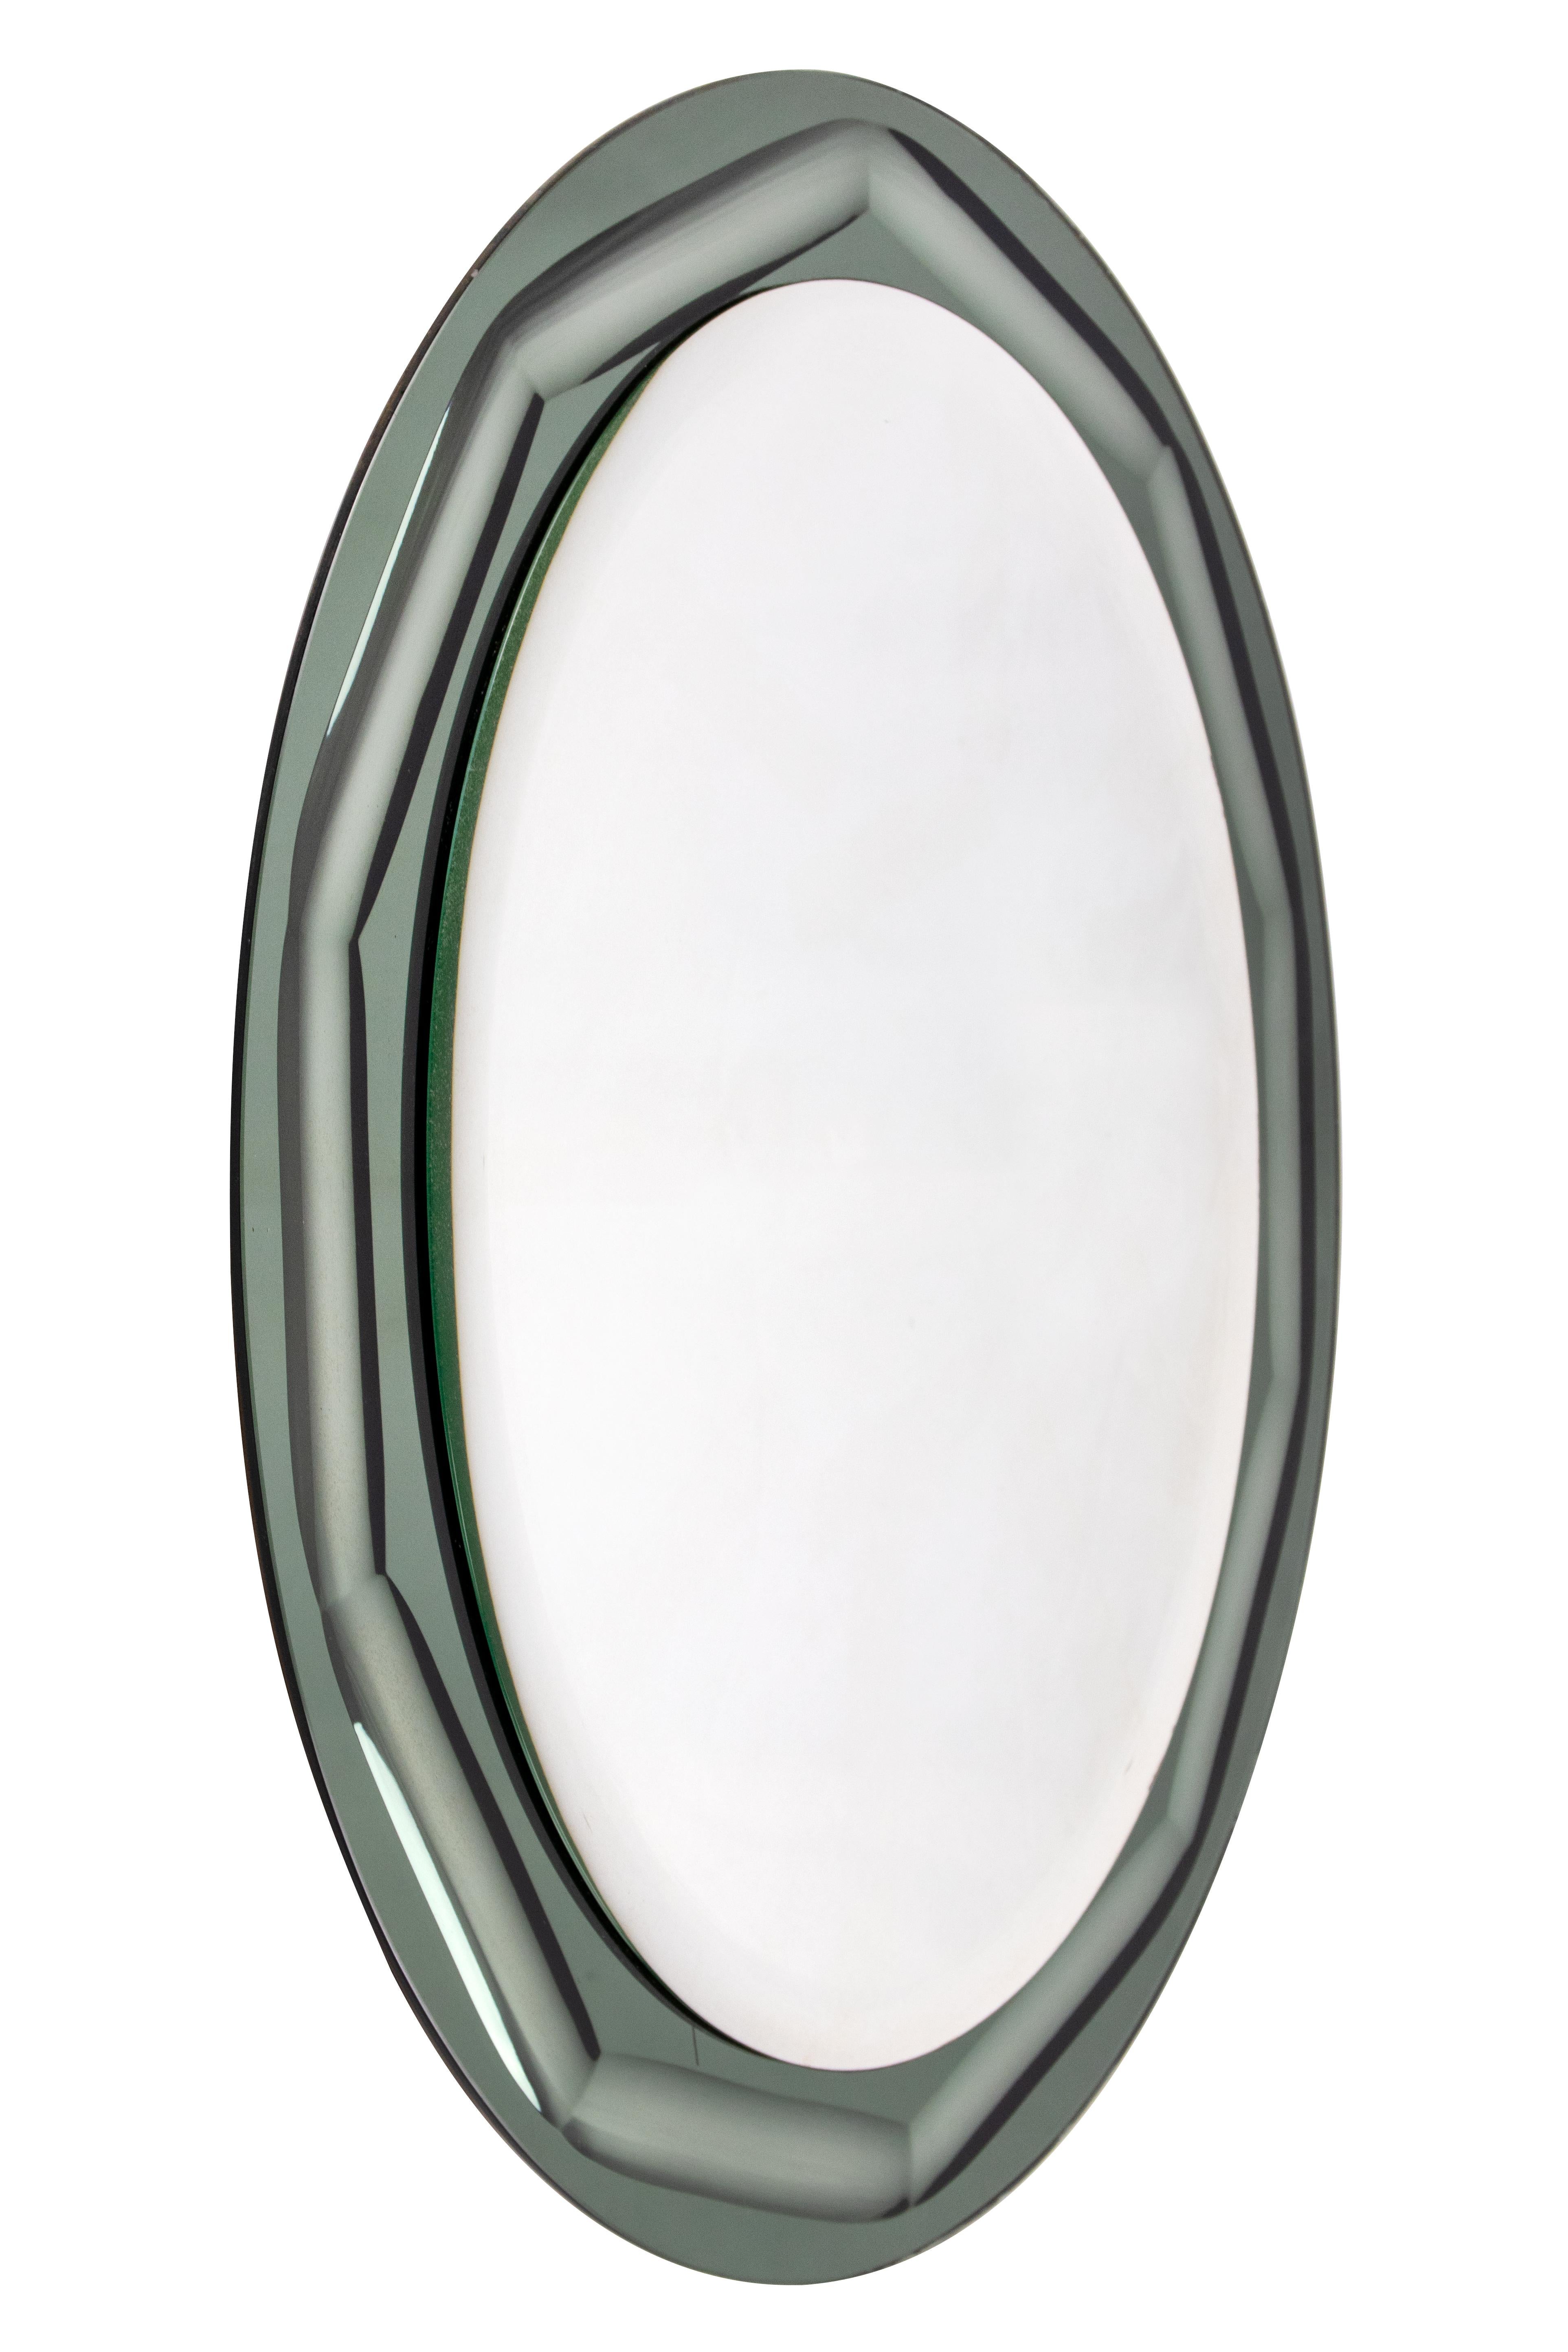 Late 20th Century Vintage Oval Mirror by Lupi Cristal-Luxor, Italy 1970s